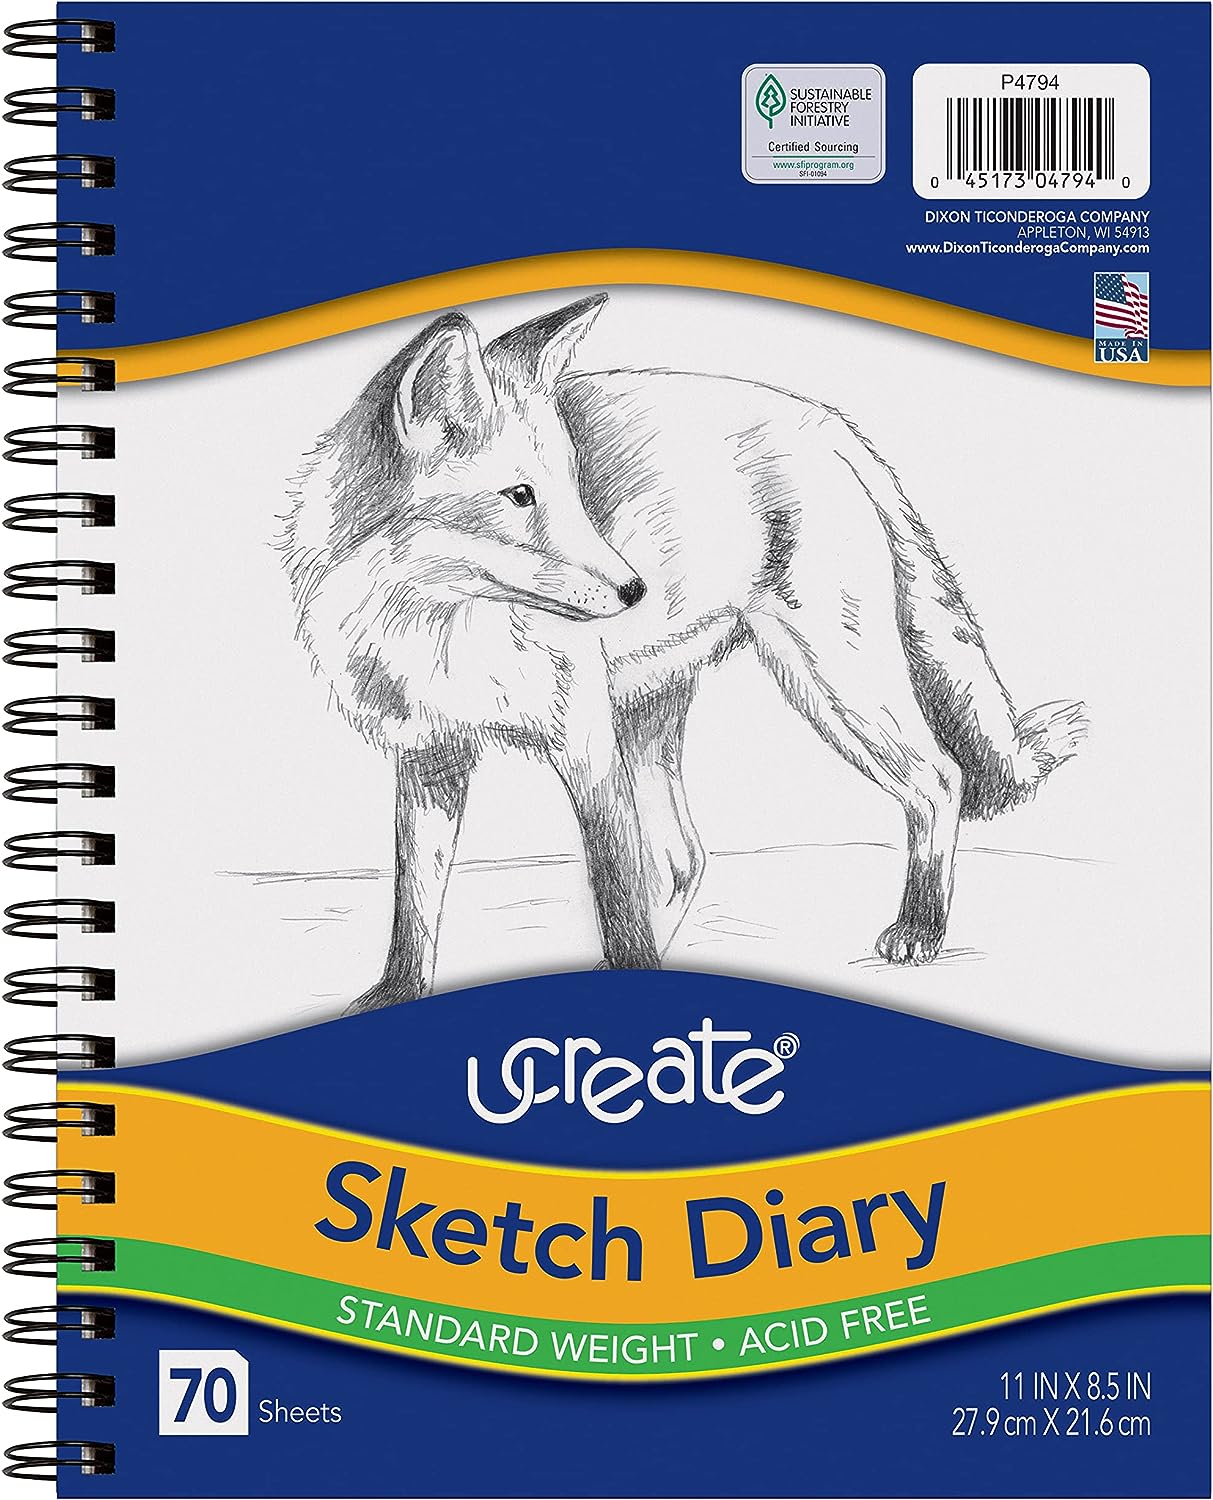 GIFTEXPRESS Bound Spiral Premium Sketch Book Sketch Pads Set, 4 Pads  x30-Sheets, 8.5 X 11 Side Wire Bound, White 120 Paper Sheets for Pencil  Ink